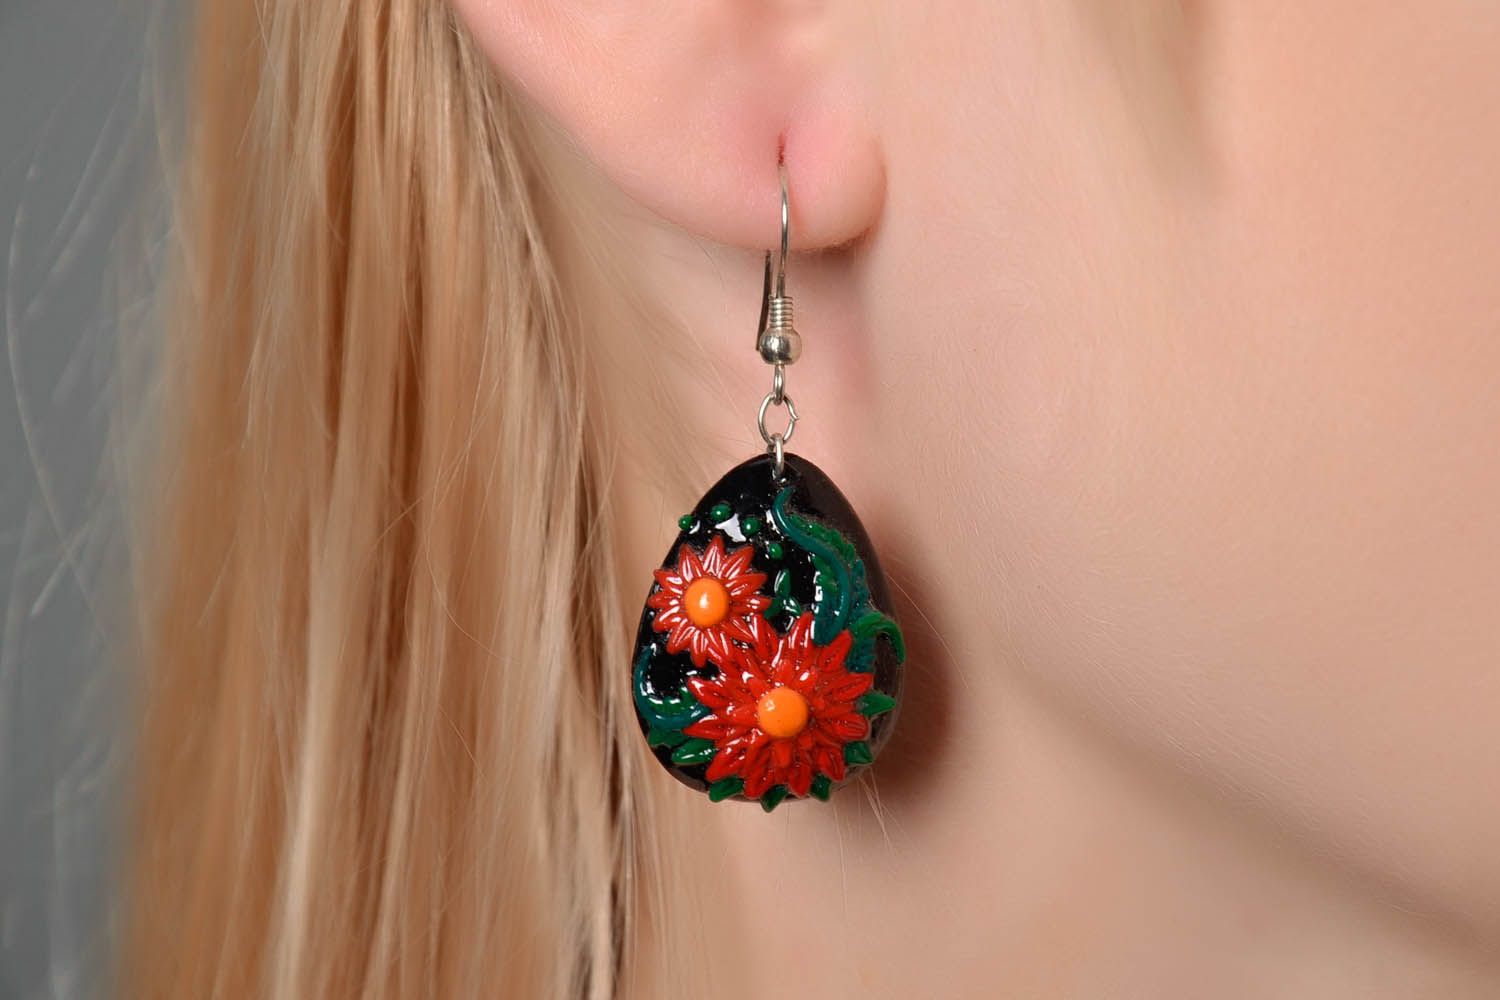 Pendant earrings made of polymer clay photo 4